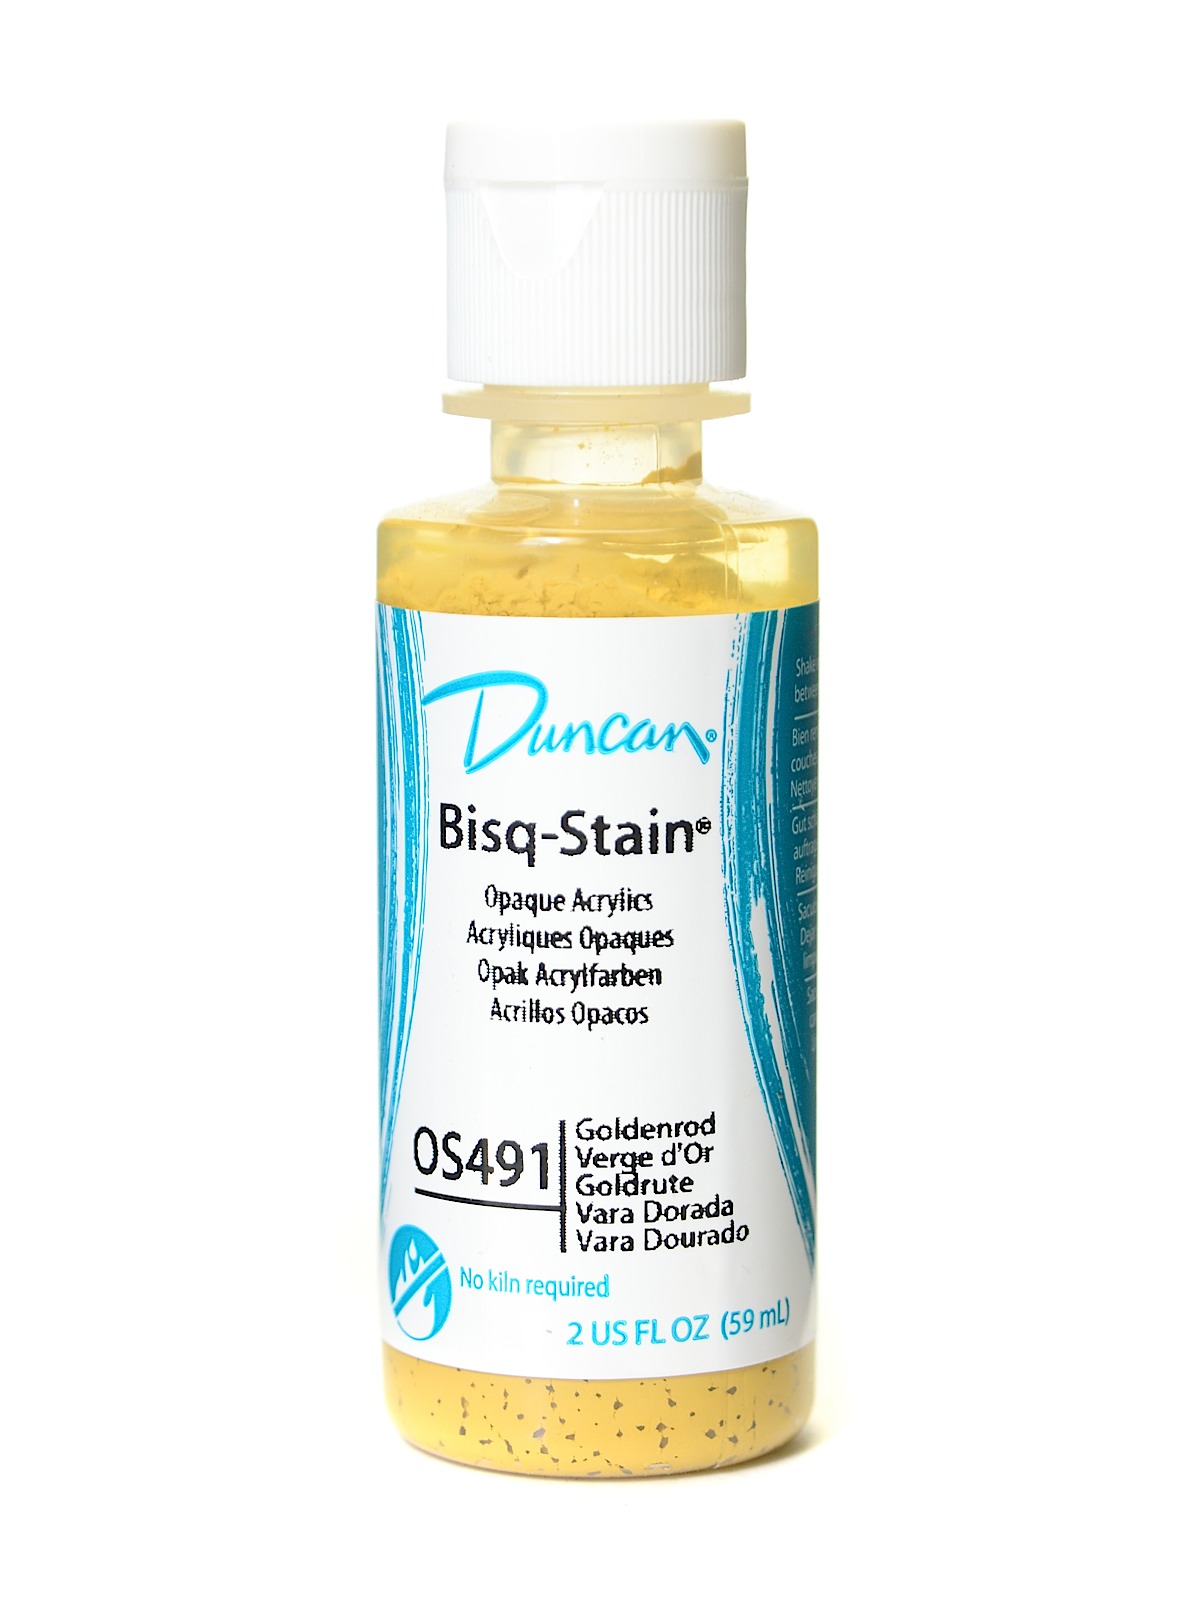 Bisq-stain Opaques Goldenrod 2 Oz.